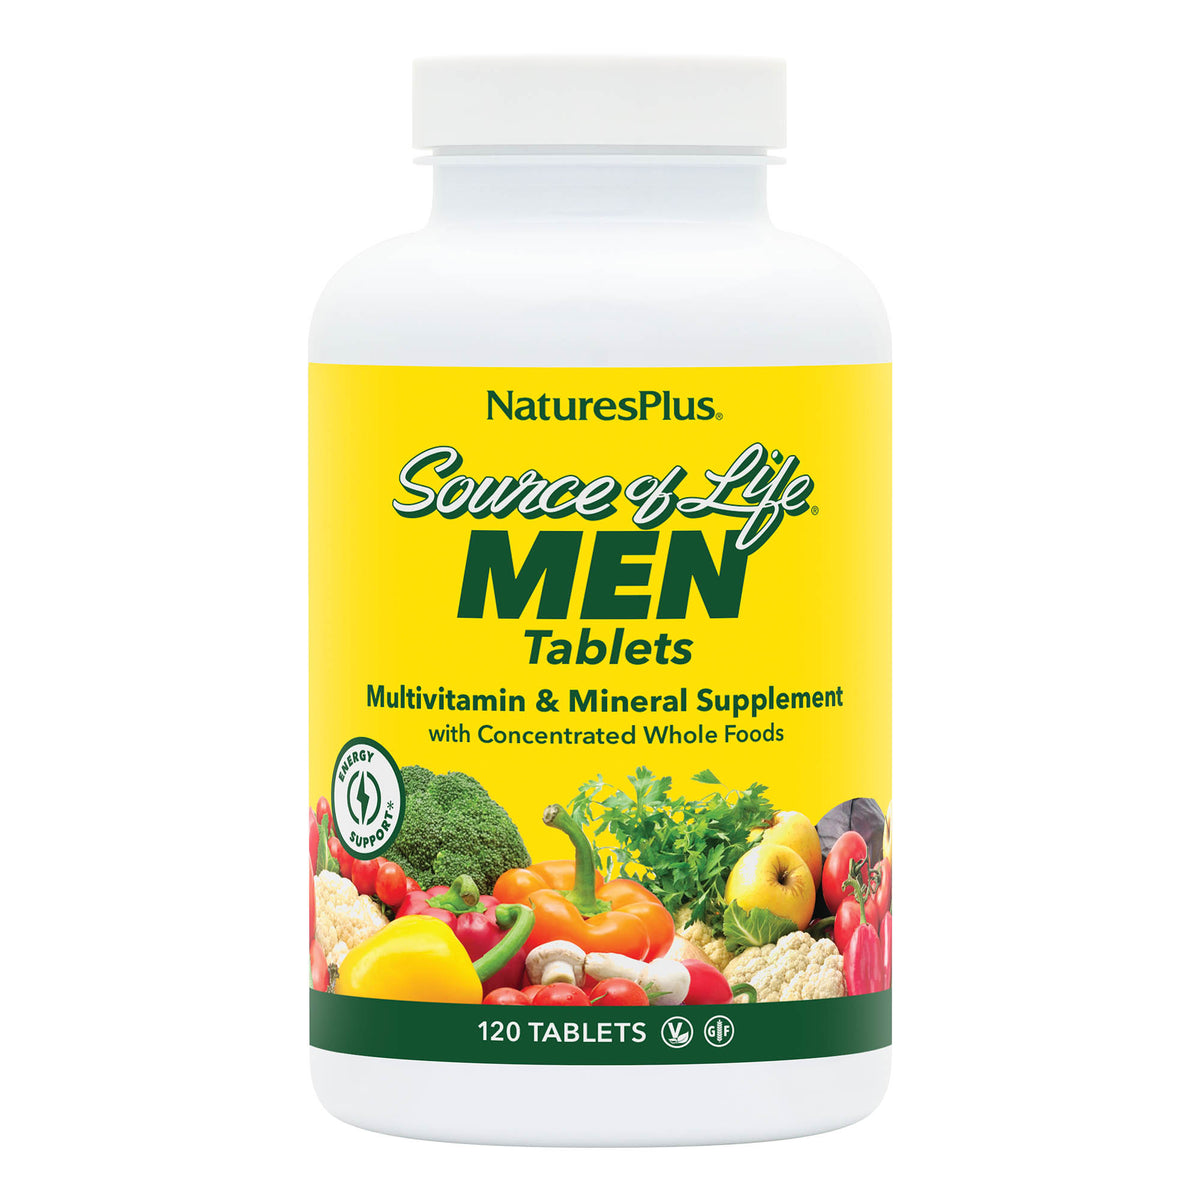 product image of Source of Life® Men Multivitamin Tablets containing 120 Count